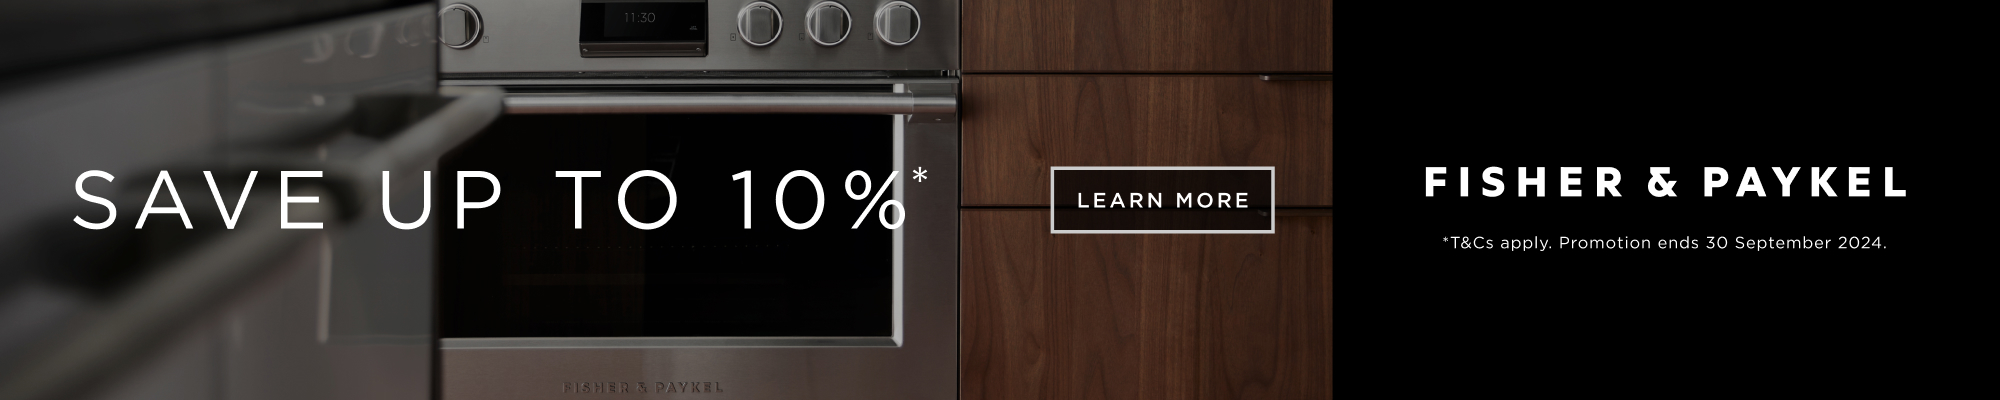 Save Up To 10% on Fisher & Paykel*